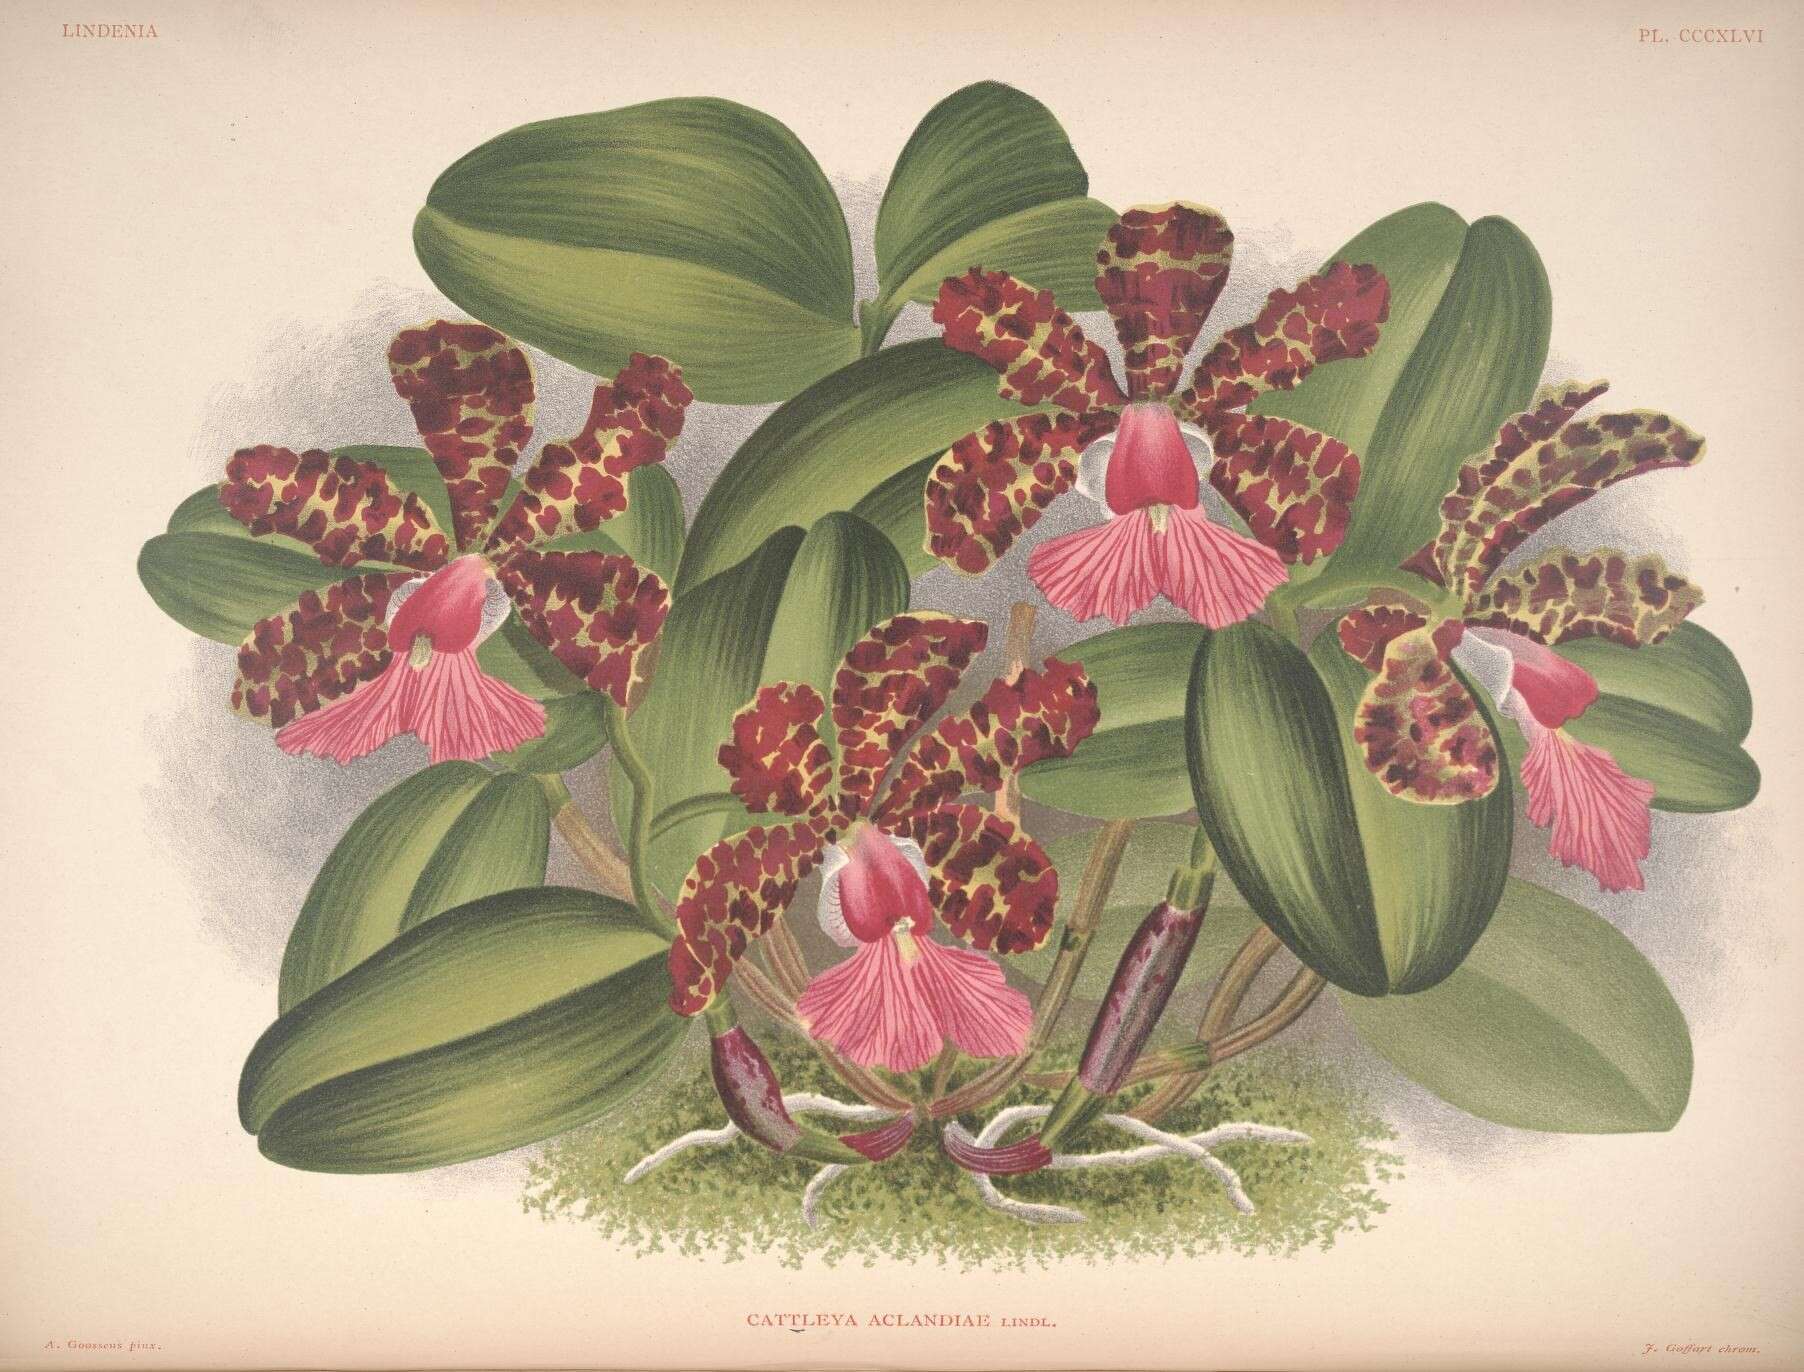 Image of Lady Ackland's Cattleya